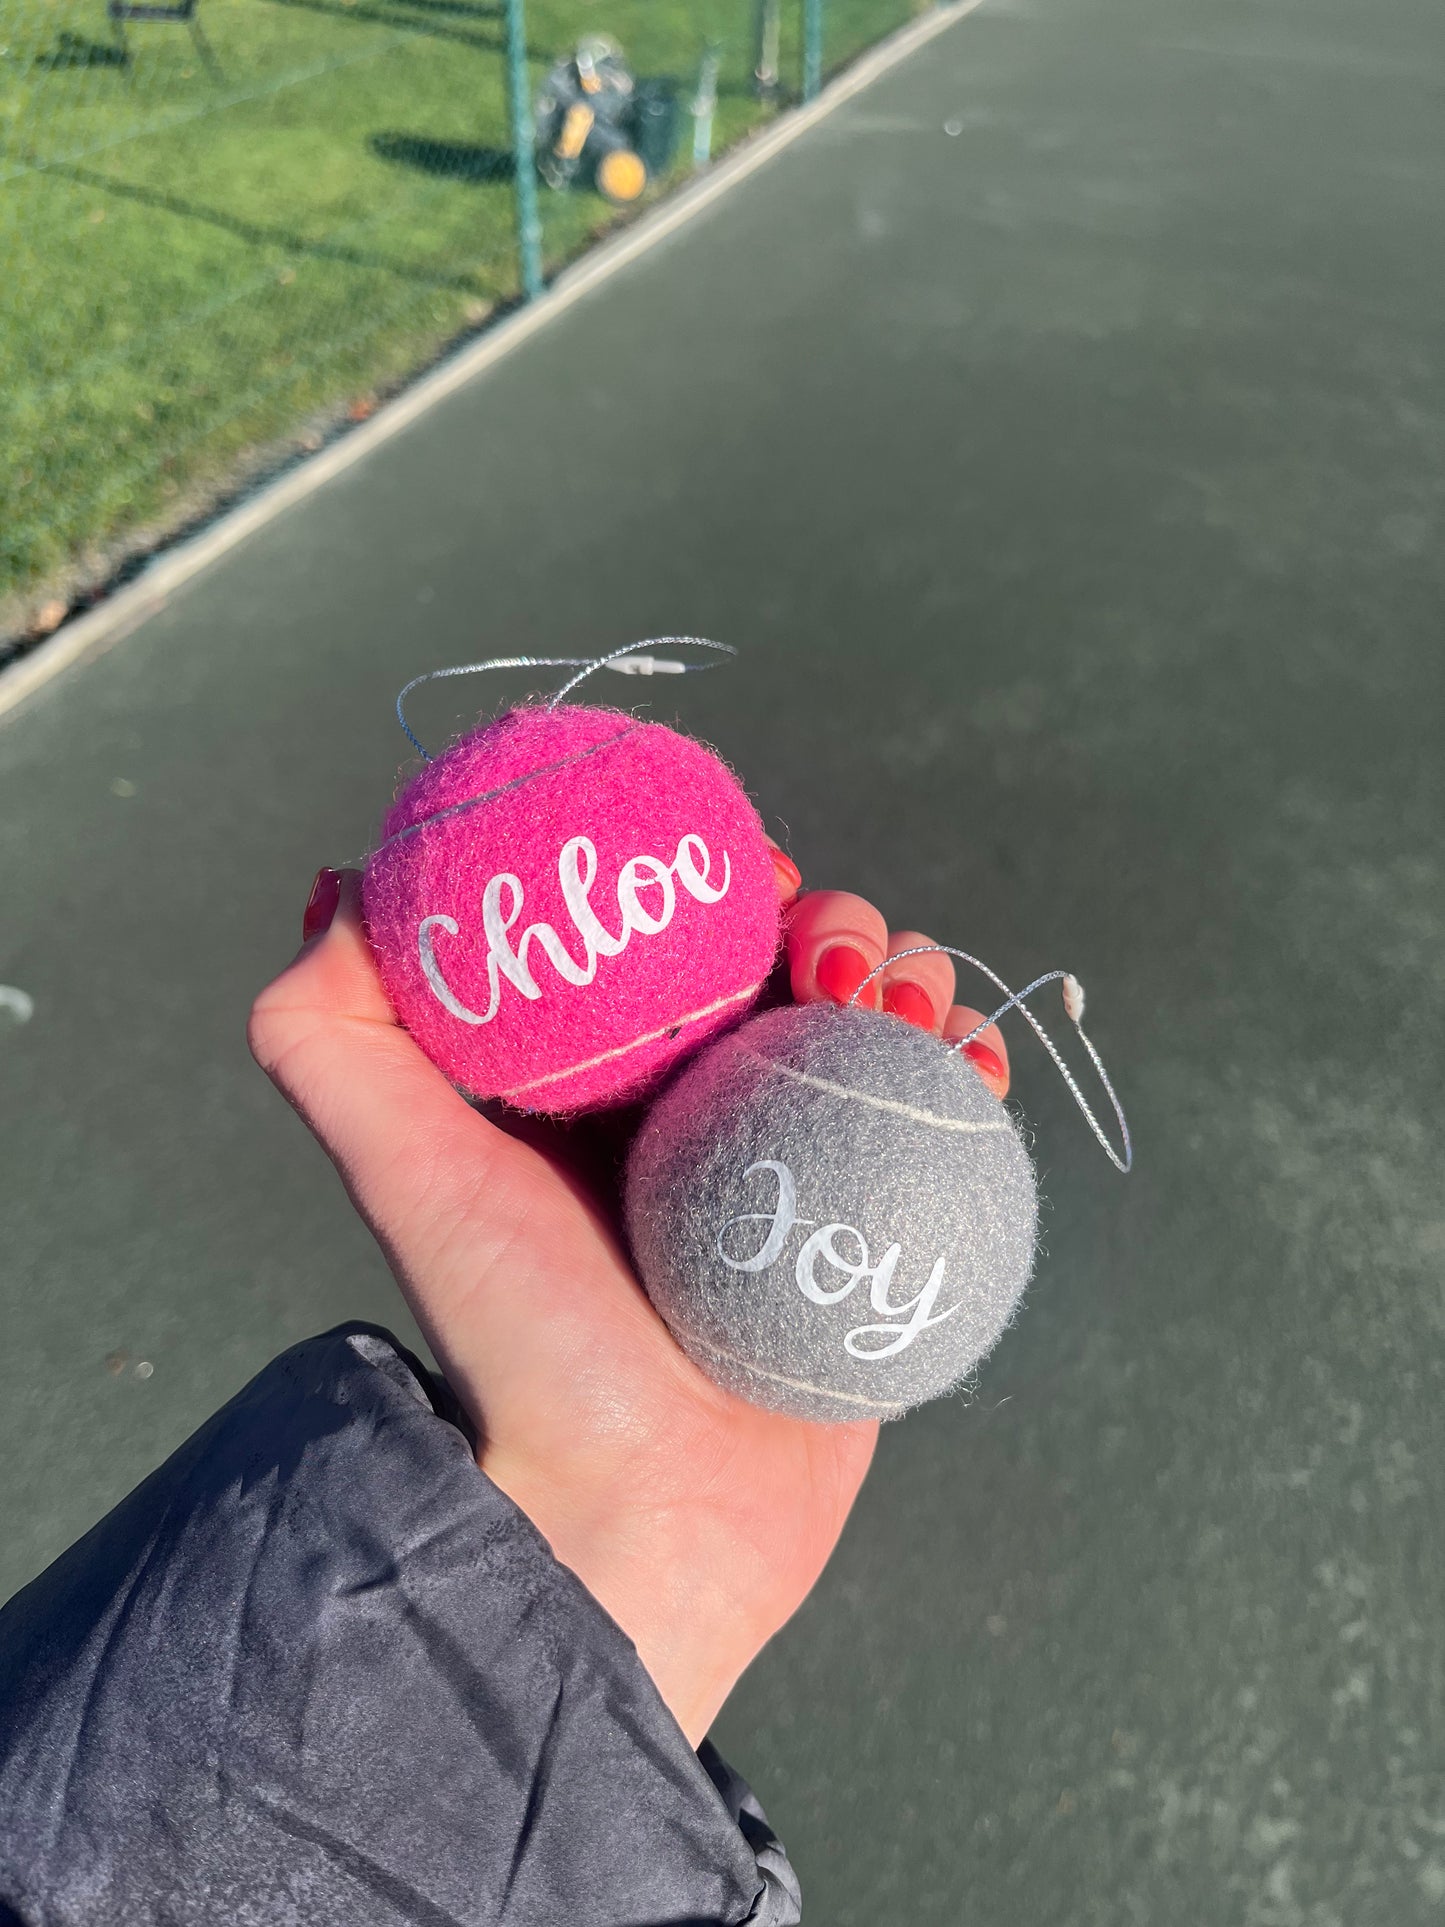 NTB - Personalised Christmas Tennis baubles